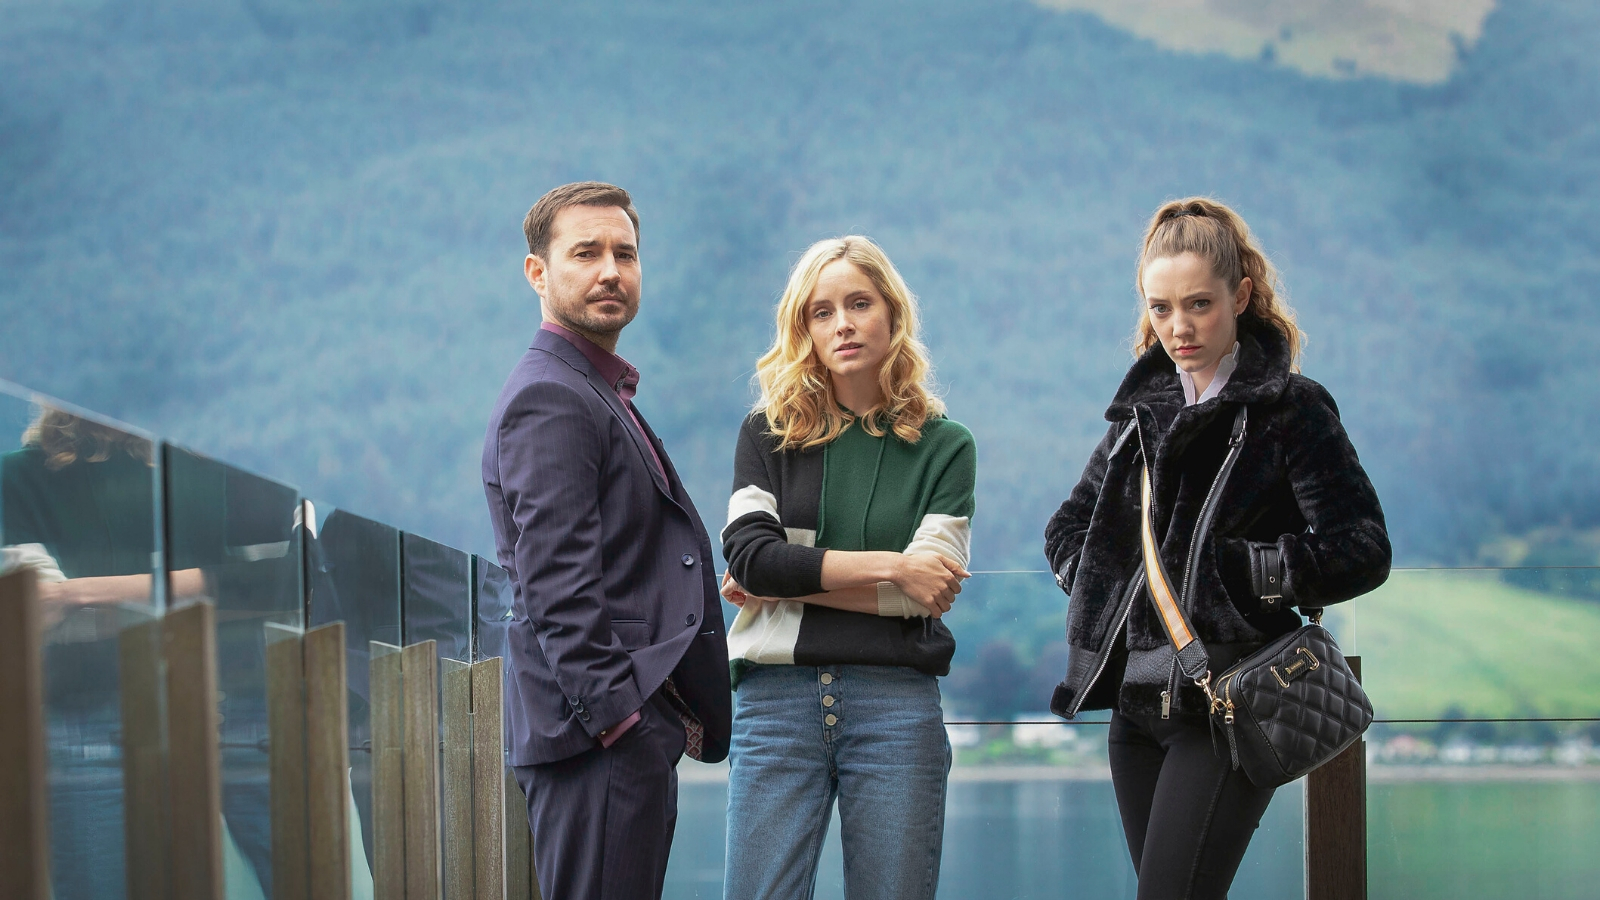 Martin Compston, Sophie Rundle and Mirren Mack stand together with a loch in the background